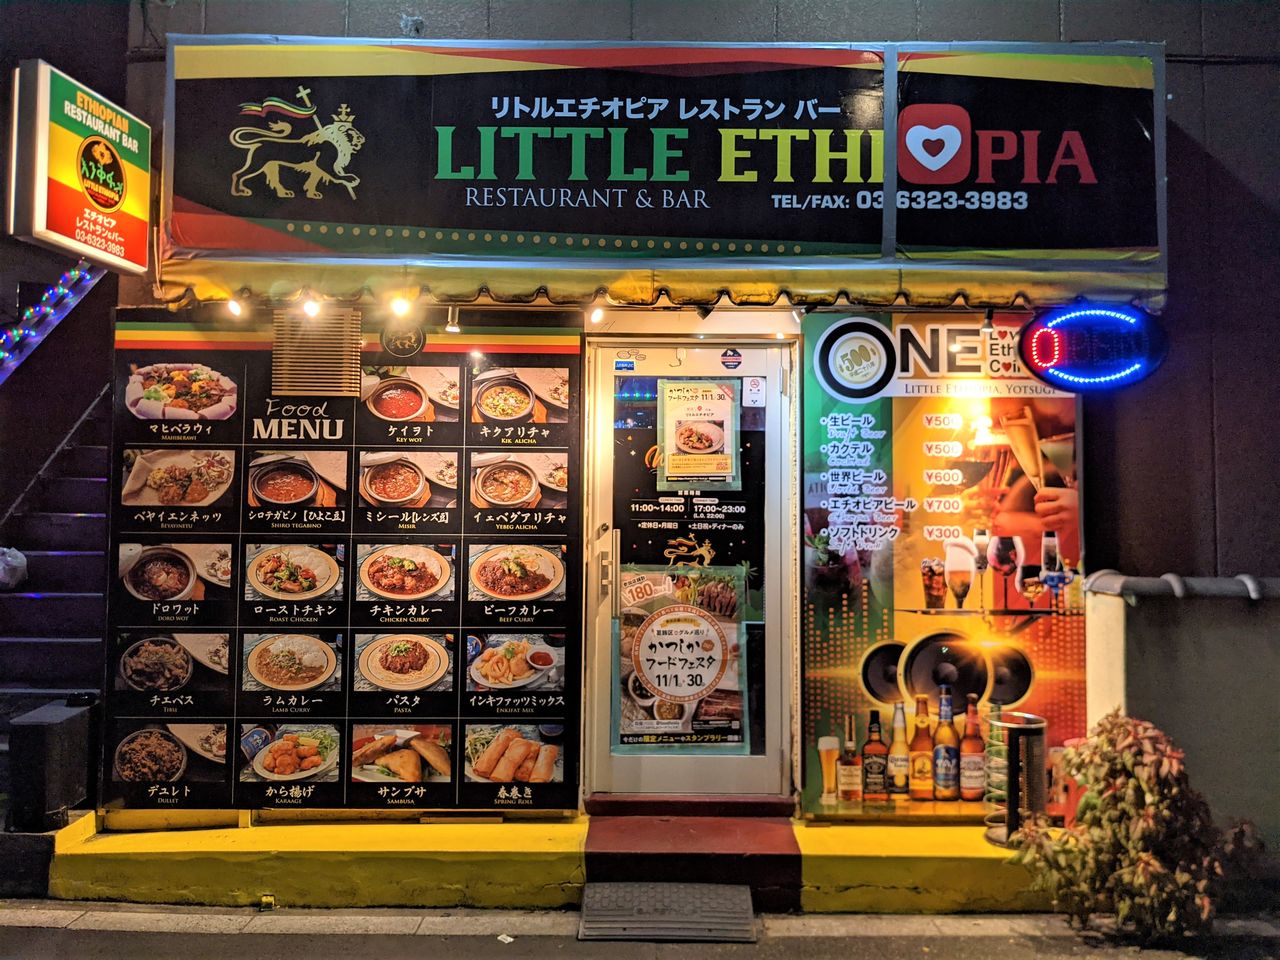 Little Ethiopia stands out in its Arakawa riverside surroundings. The vivid colors out front can be overwhelming, but inside is a calm space where friendly Ephrem and his wife Mina offer hospitality in the Ethiopian way.